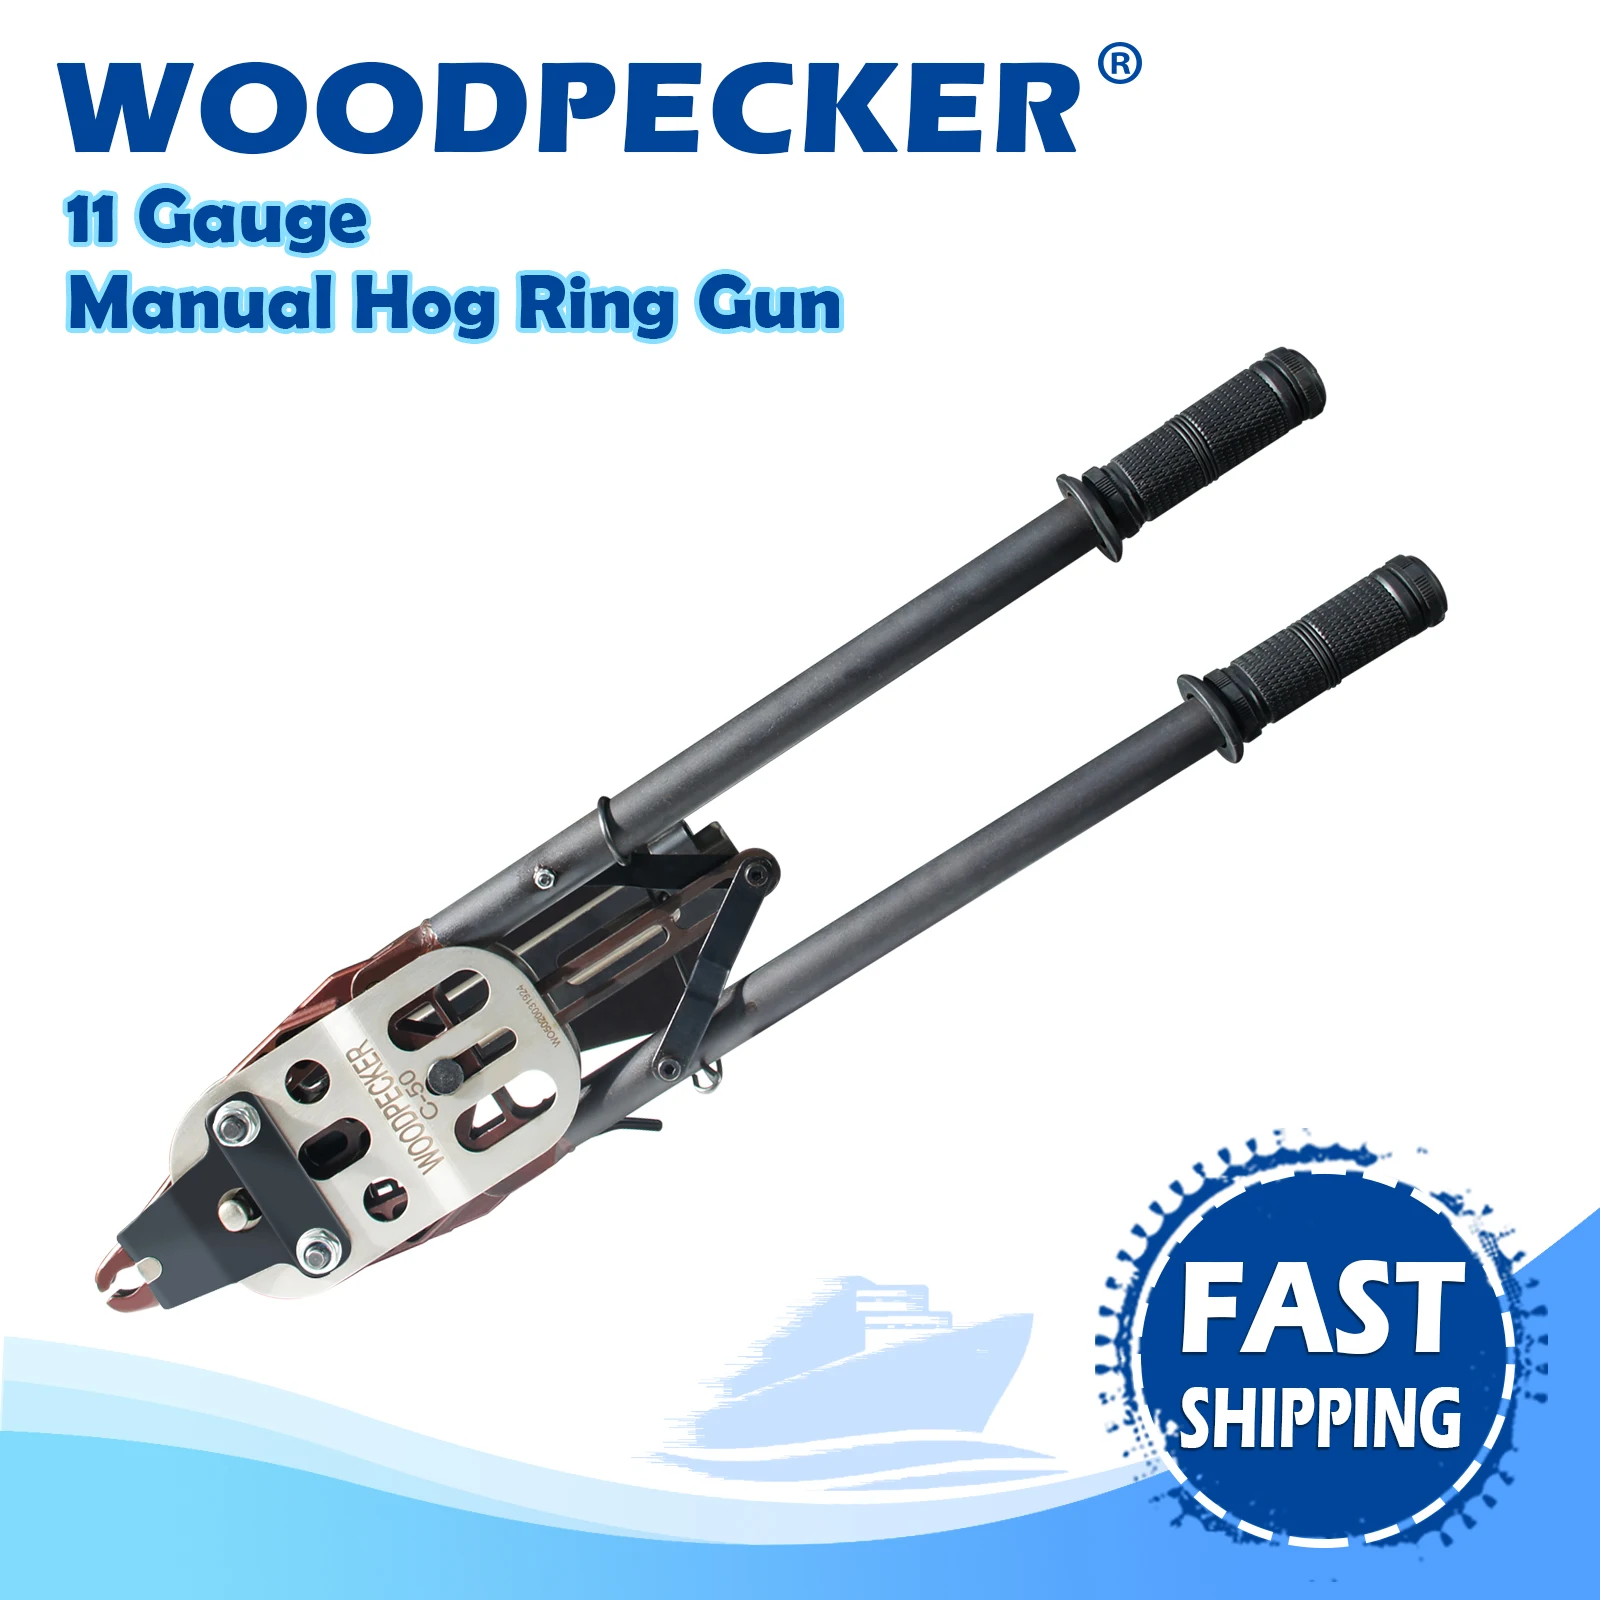 WOODPECKER C50 11 Gauge Heavy-Duty Manual Hog Ring Gun, Snap-Ring Plier with Auto-feed System, 45mm Crown for Wire Cages,Fencing oil pressure sensor tee to m12 x 1 25 to 1 8 27 npt bx102377 1 adapter fuel pressure gauge bolt adapter feed line gauge